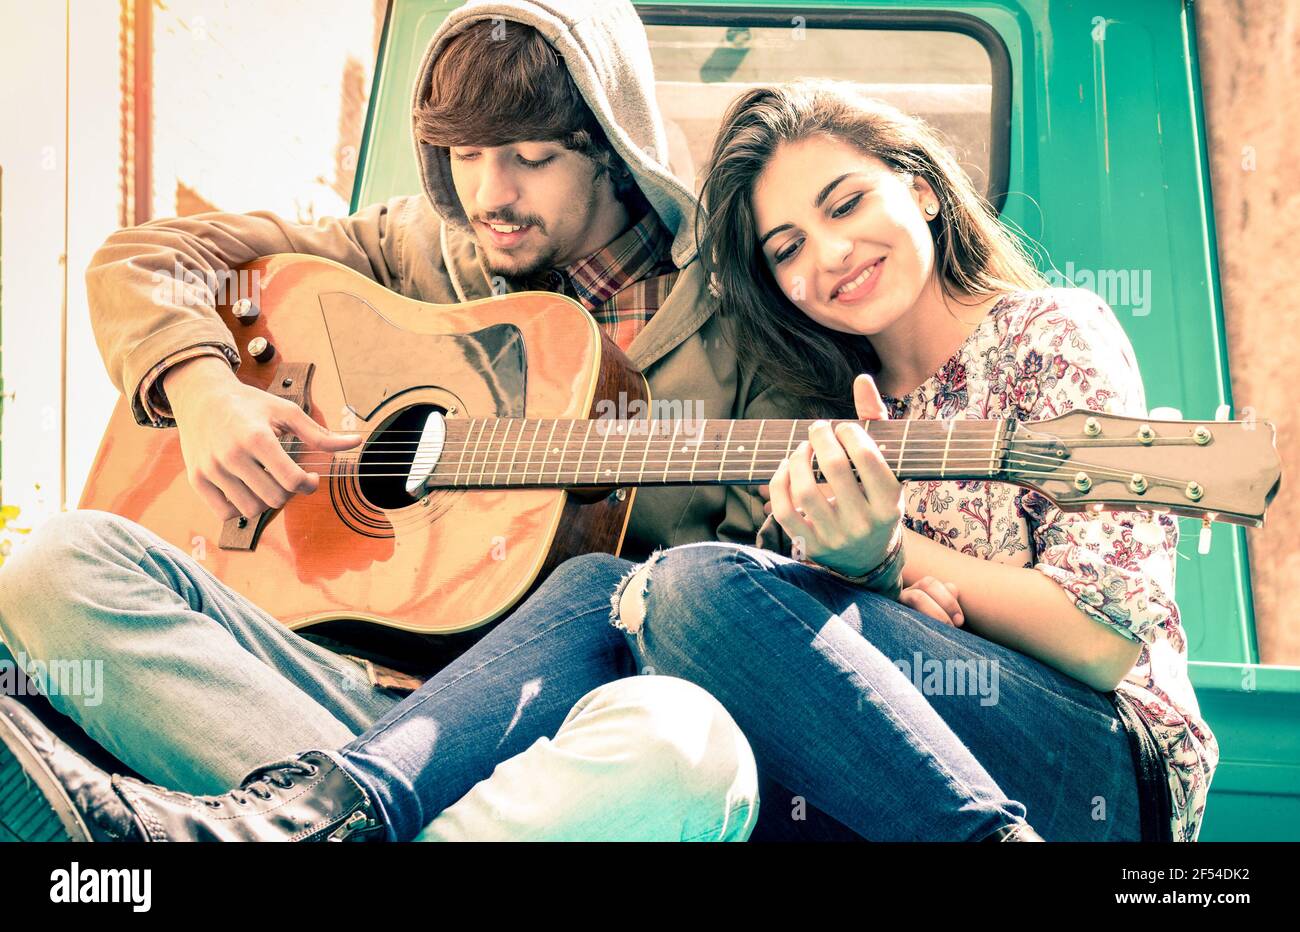 Romantic couple of lovers playing guitar on old fashioned mini car - Nostalgic retro concept of love with soft focus on the faces of boyfriend and gir Stock Photo